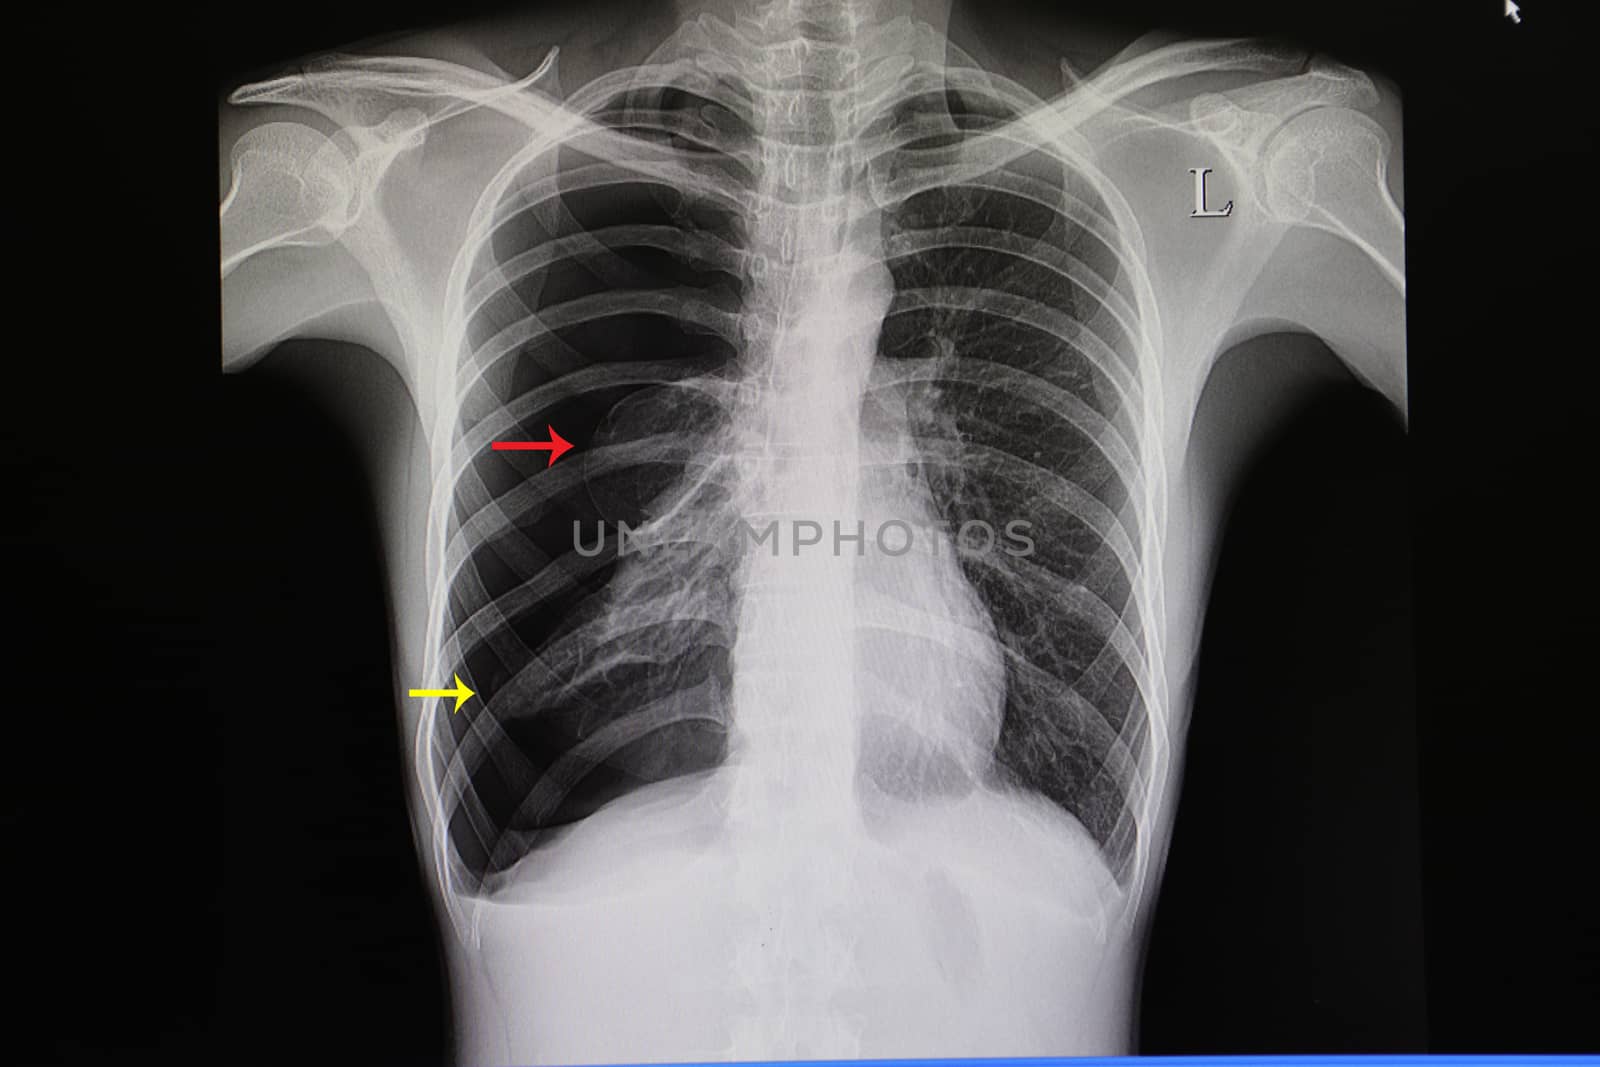 a chest xray film of a patient with large spontaneous pneumothorax with almost total right lung collapse (yellow arrow), a lung bleb is also shown (red arfrow)